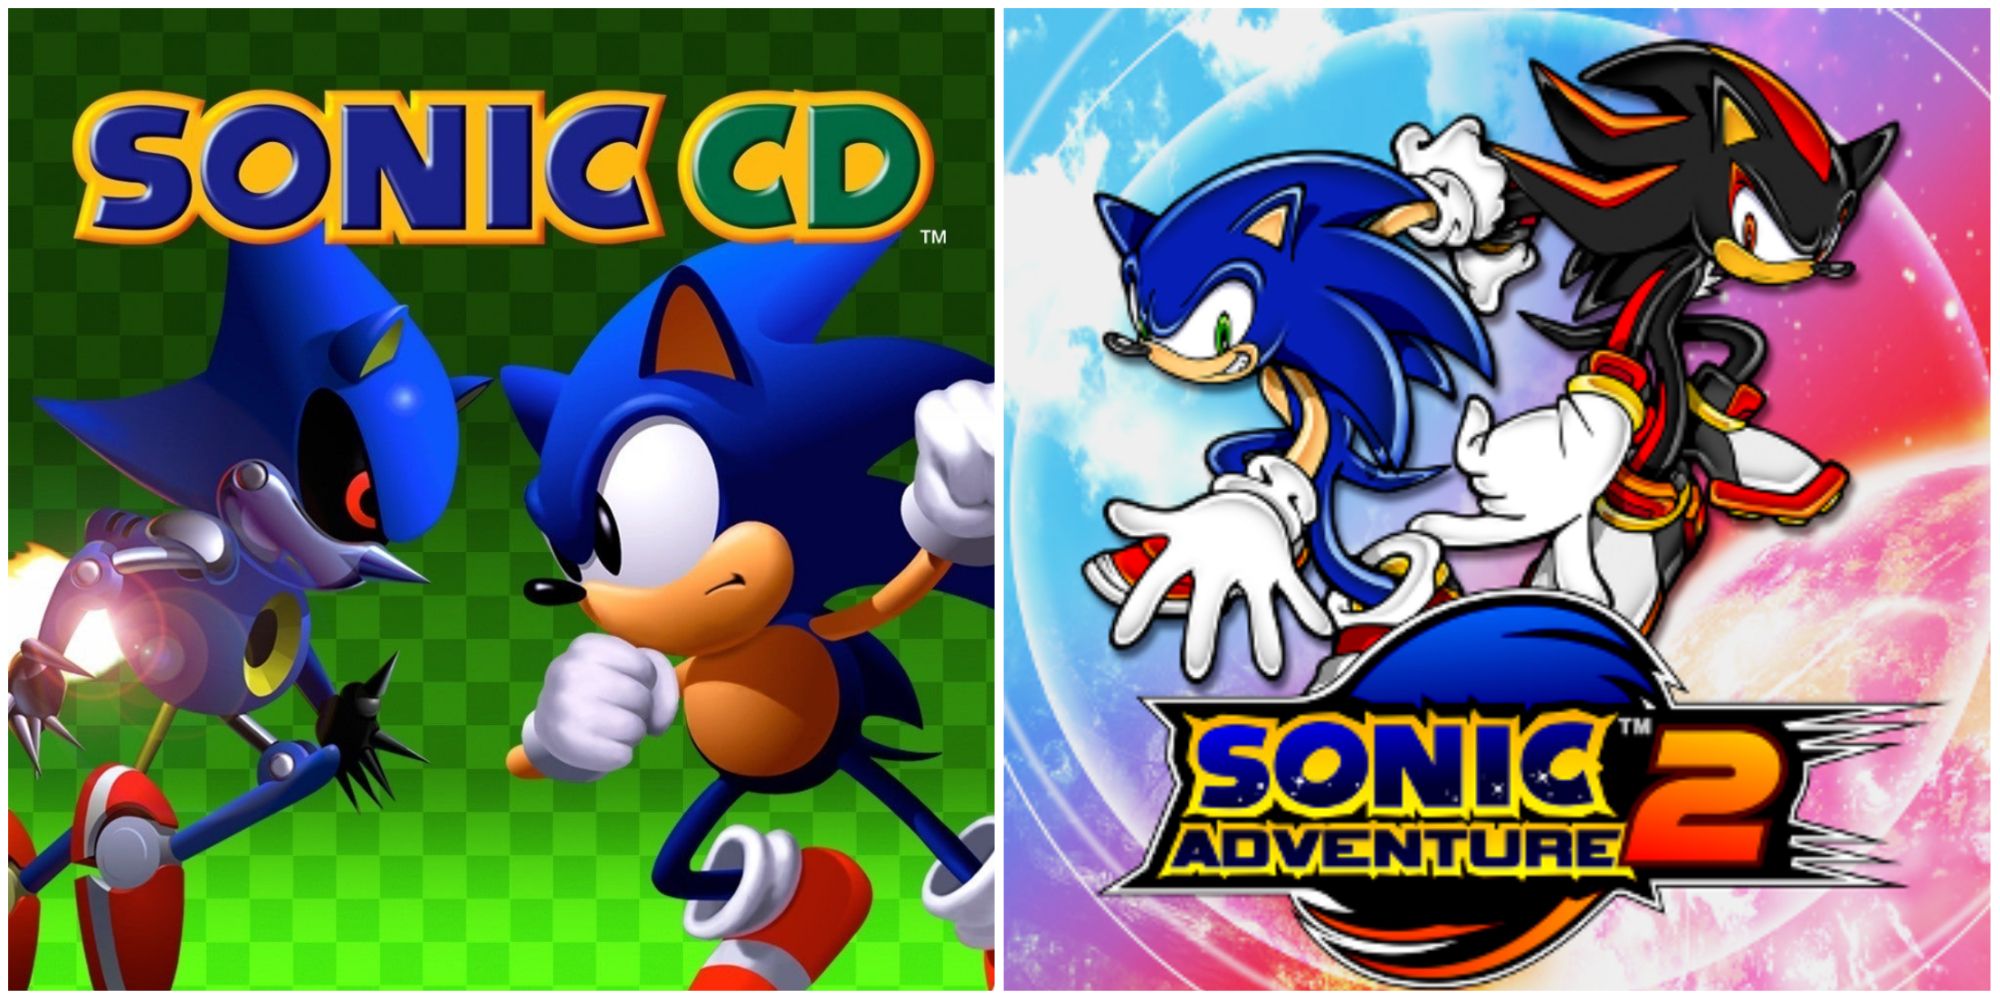 The cover art for Sonic CD and Sonic Adventure 2